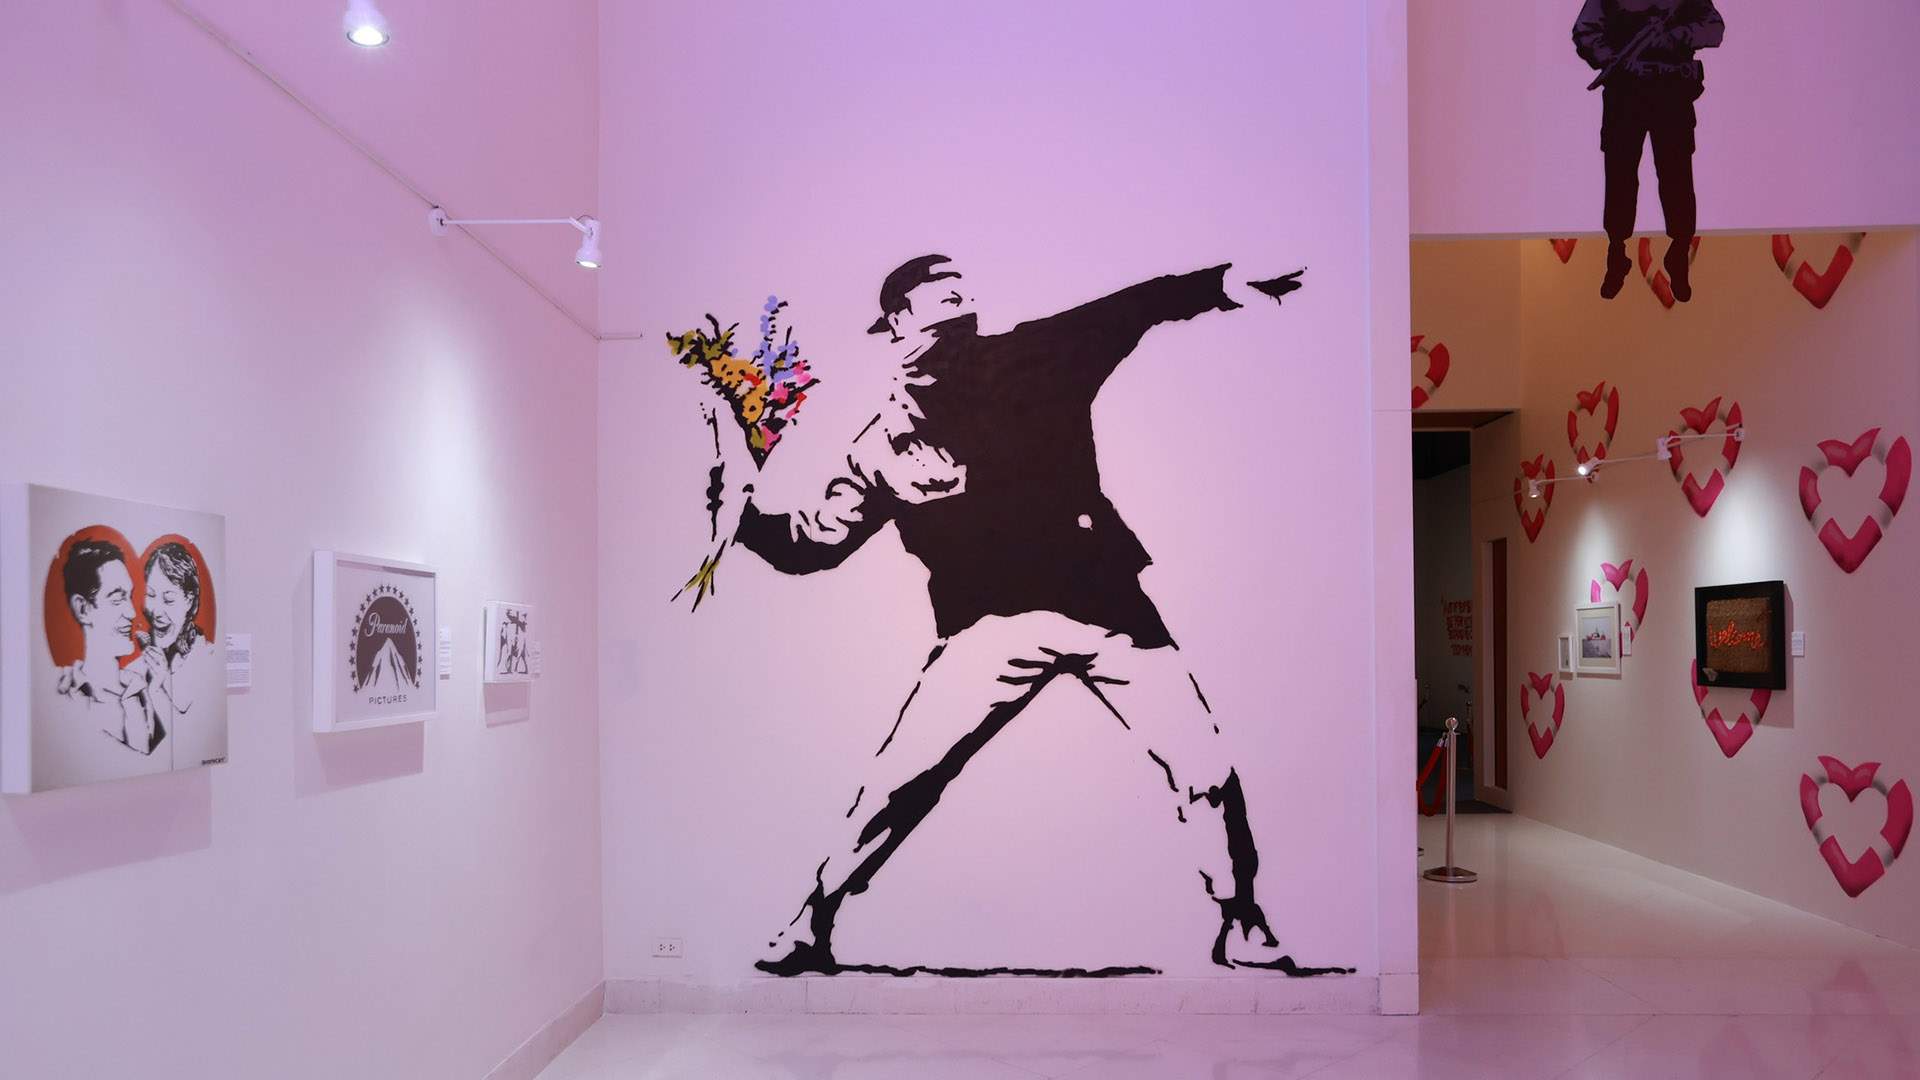 A Big Banksy Exhibition Featuring More Than 150 Artworks Is Coming to Brisbane This Autumn